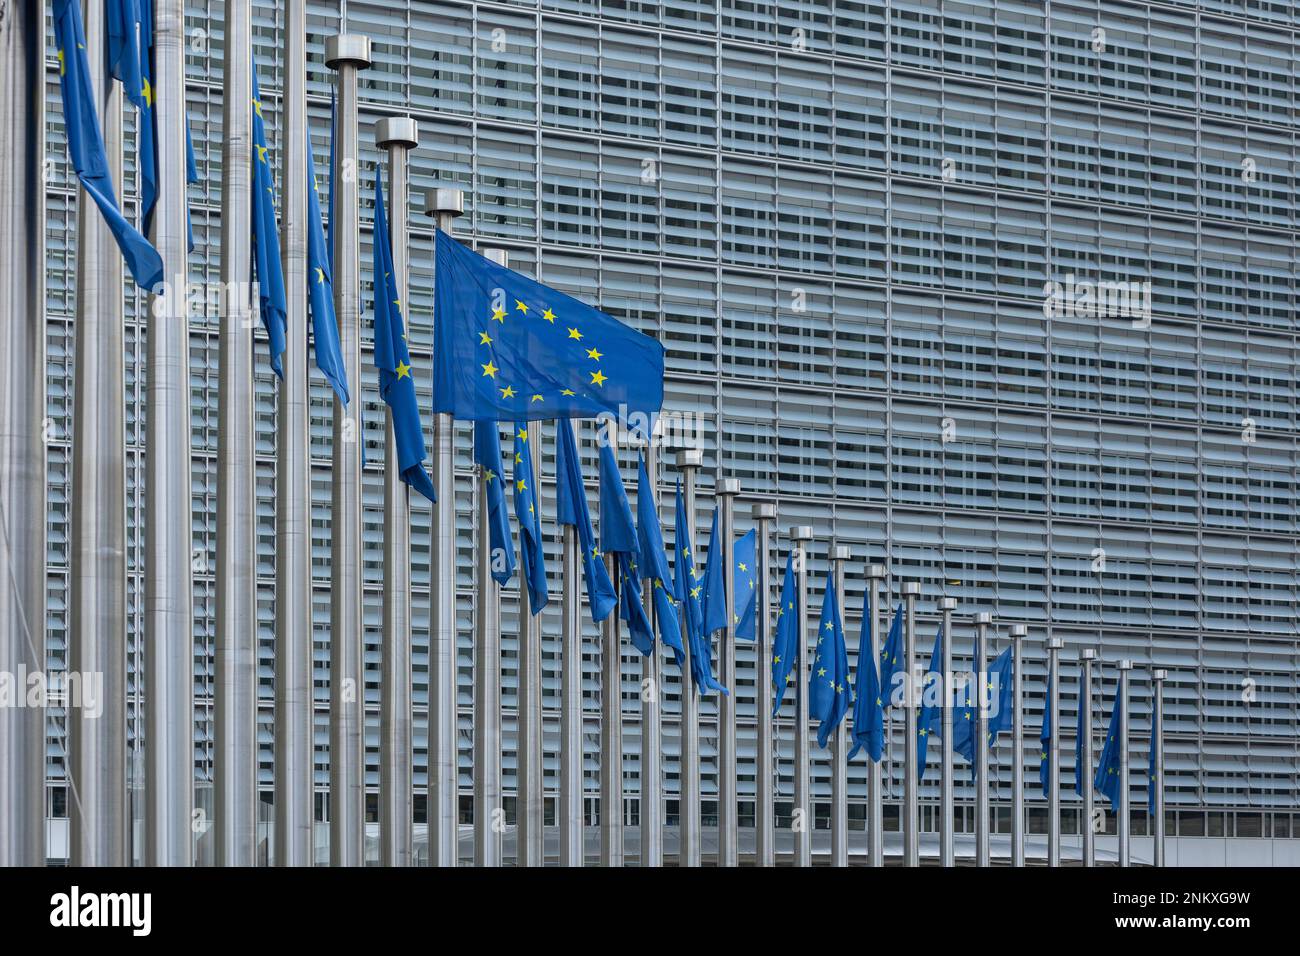 BRUSSELS, Belgium - February 23, 2023: Berlaymont building, seat of the European Commission, with flags blowing in the wind in front of it Stock Photo